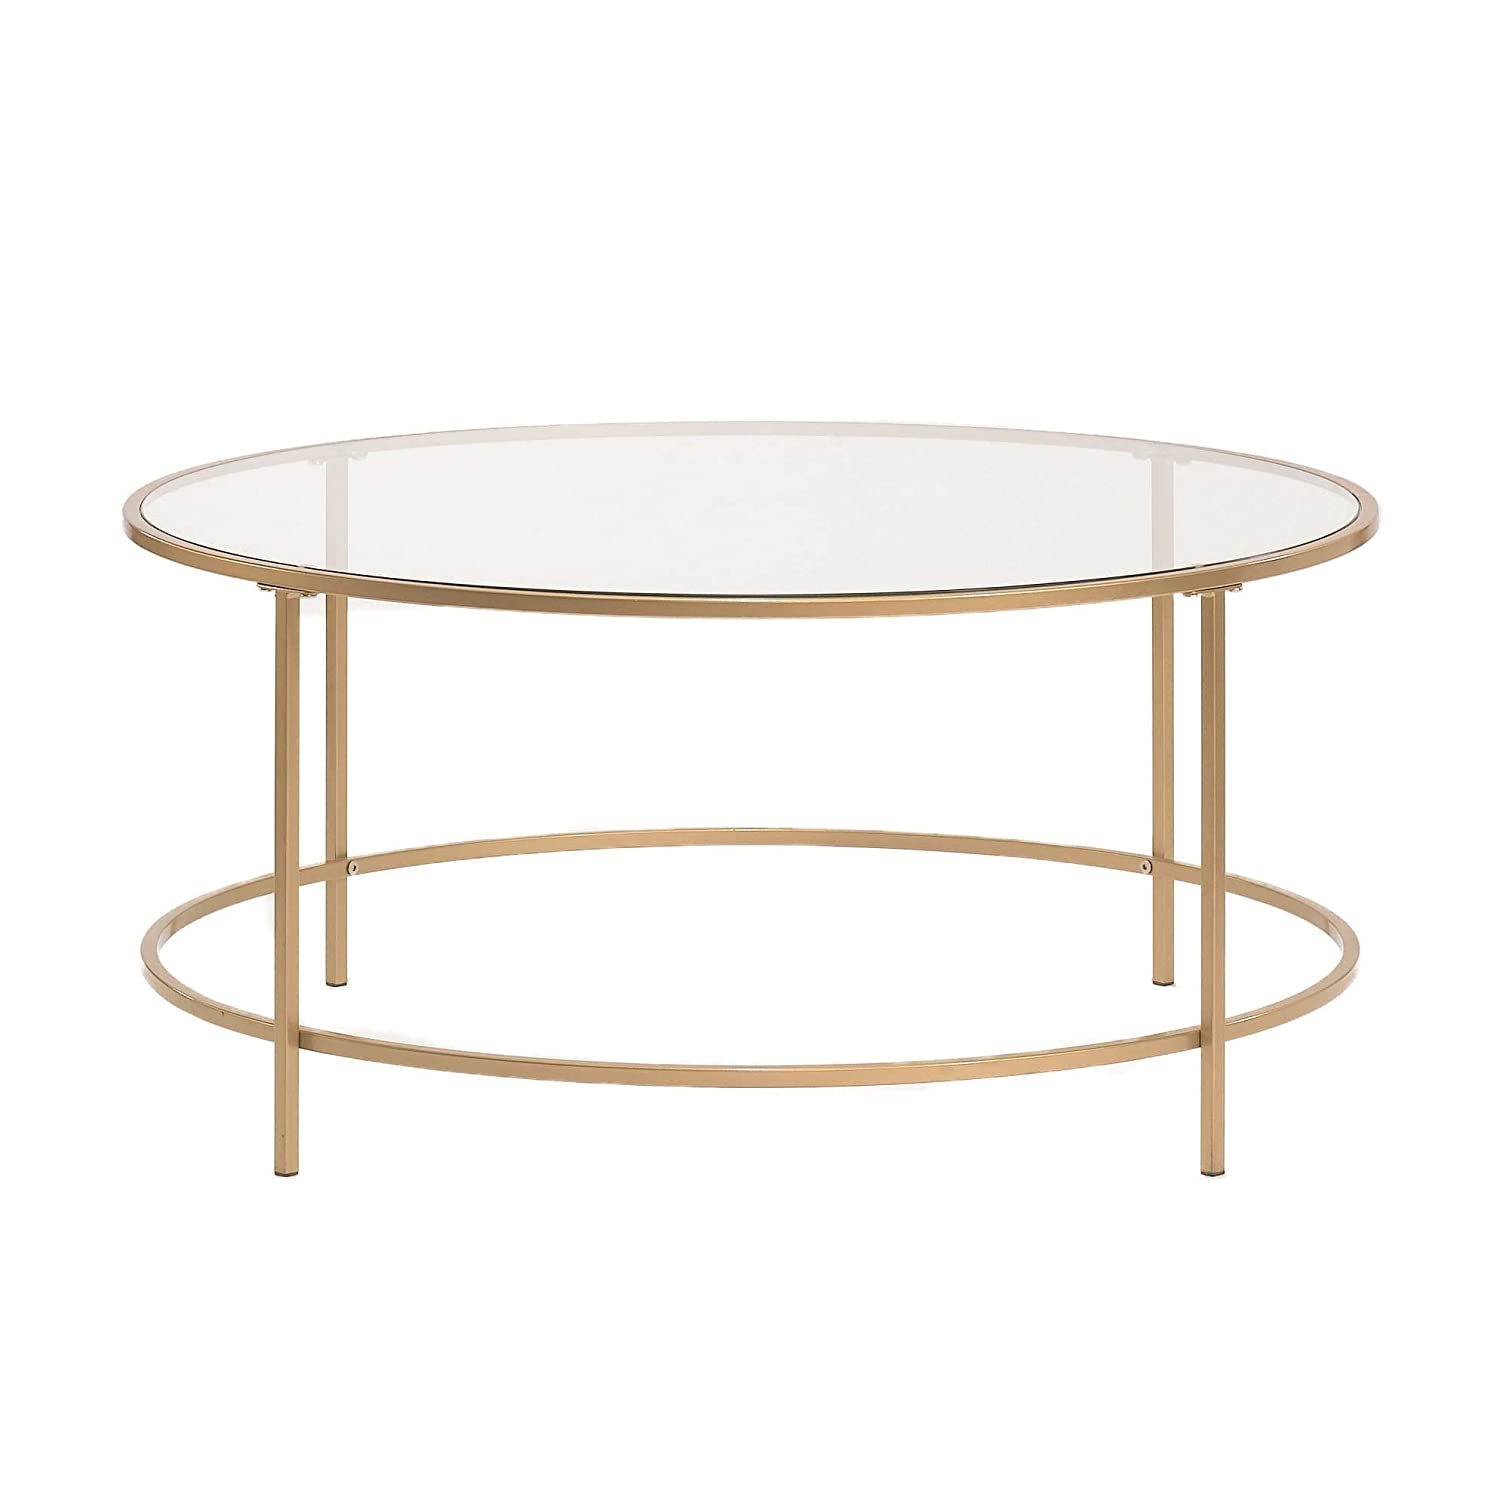 Sauder 417830 Int Lux Coffee Table Round, Glass / Gold Finish - $181.44